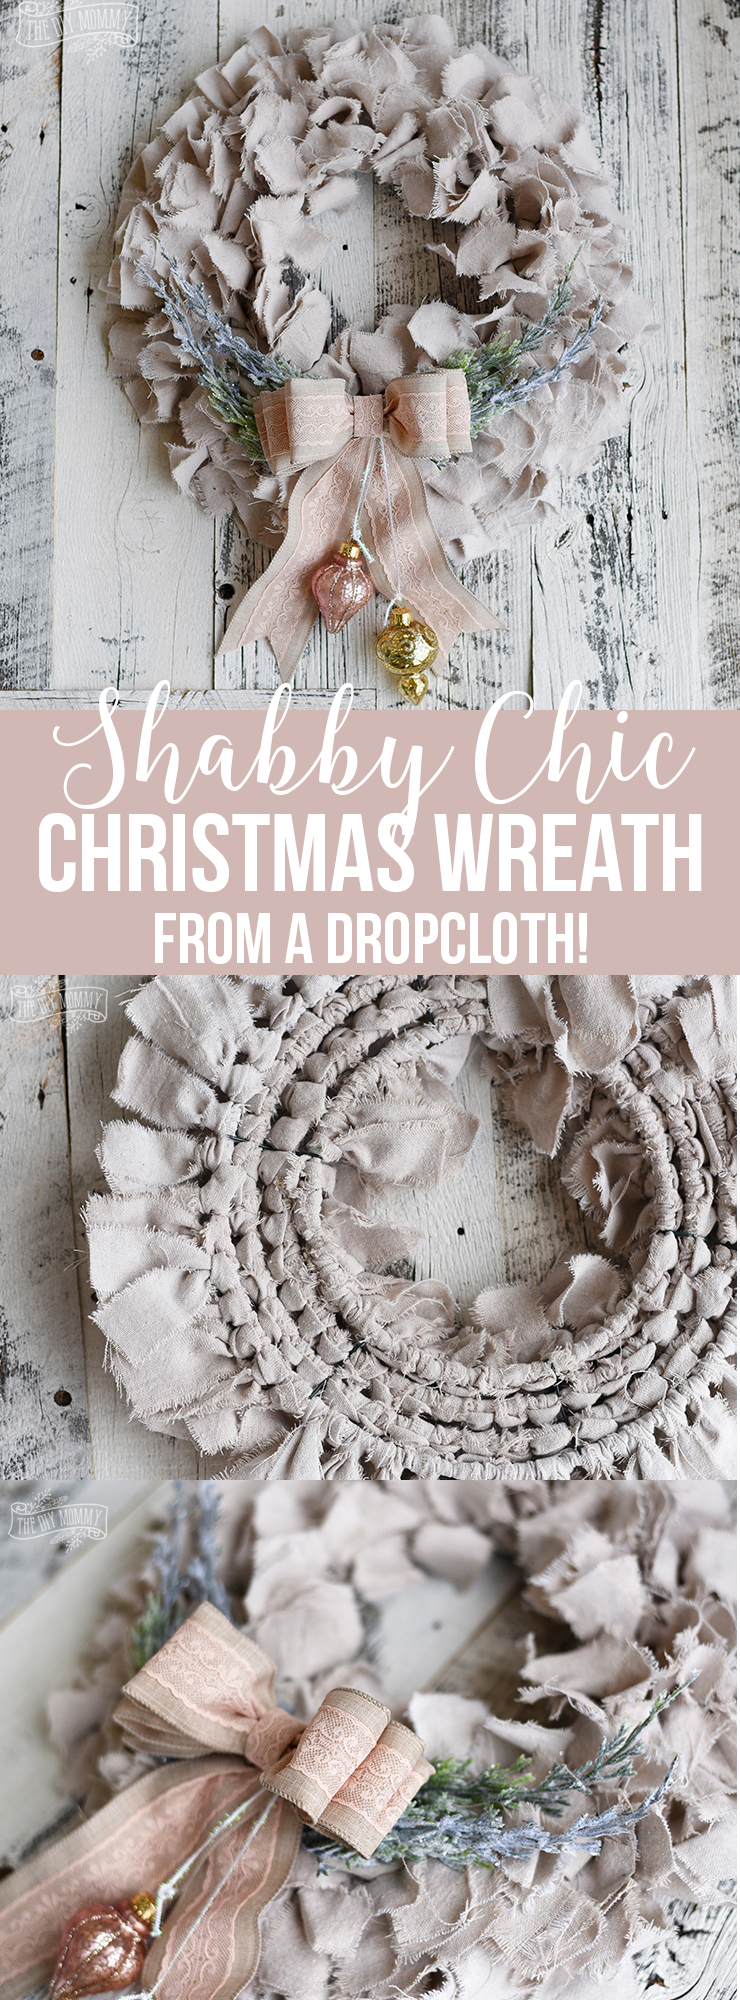 DIY Shabby Chic Dropcloth Rag Christmas Wreath in Pink, Natural, Gold